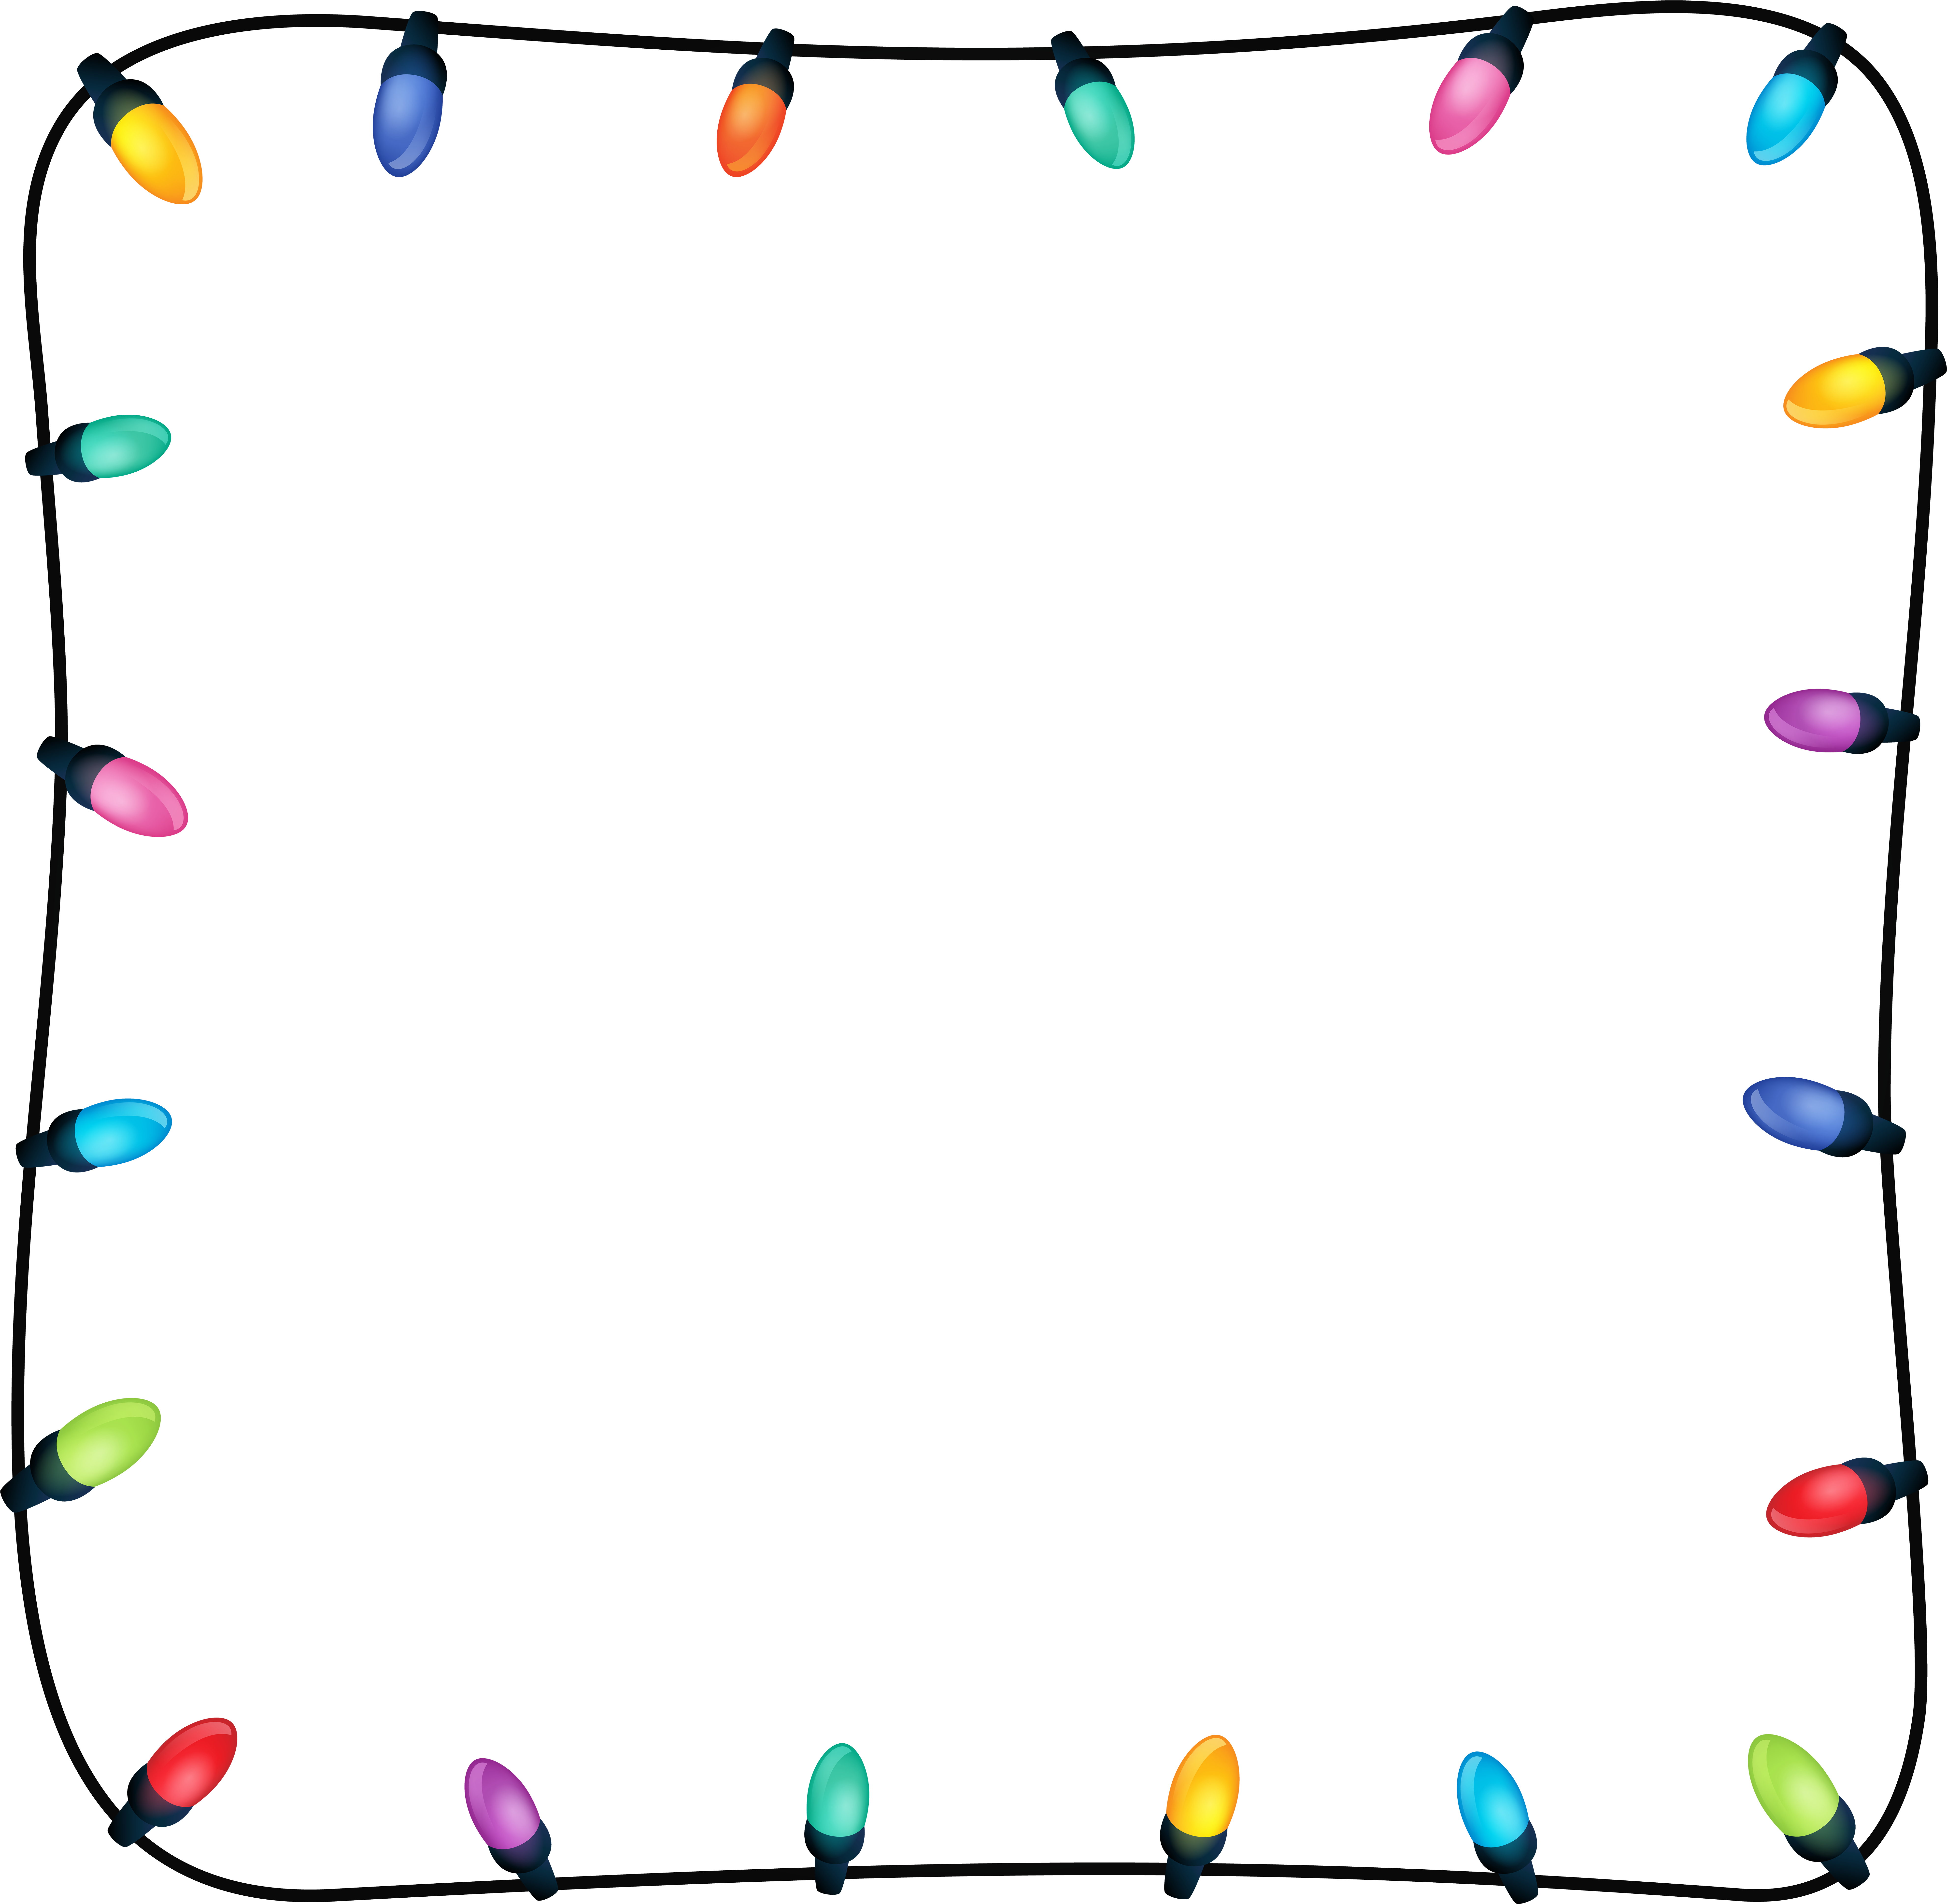 Colorful Christmas Lights Border Clipart PNG image